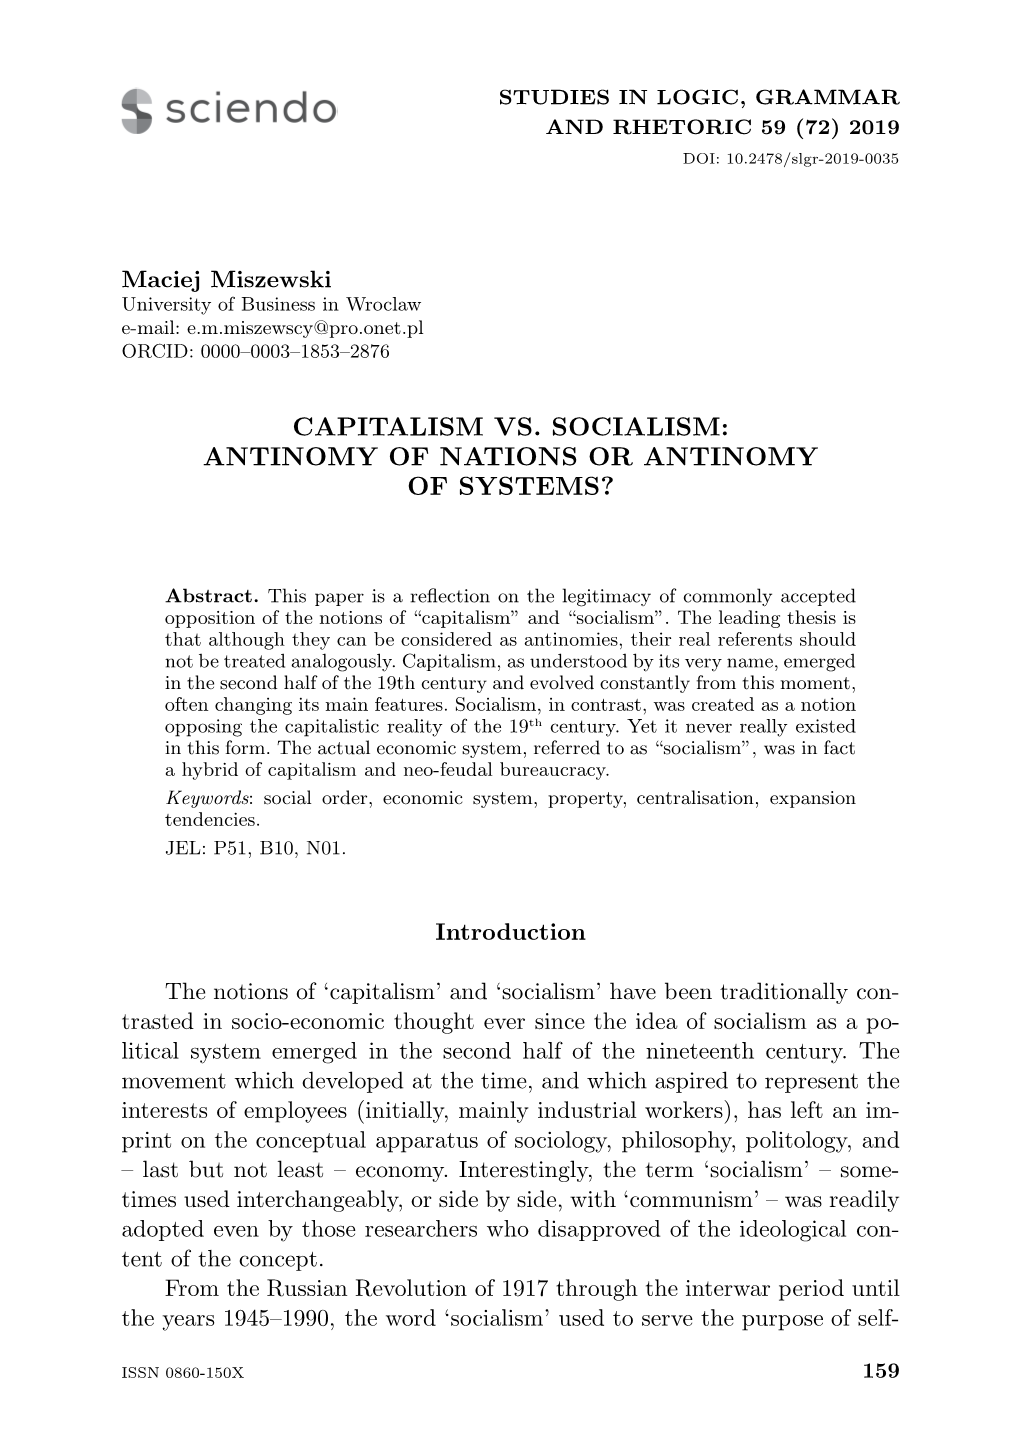 Capitalism Vs. Socialism: Antinomy of Nations Or Antinomy of Systems?